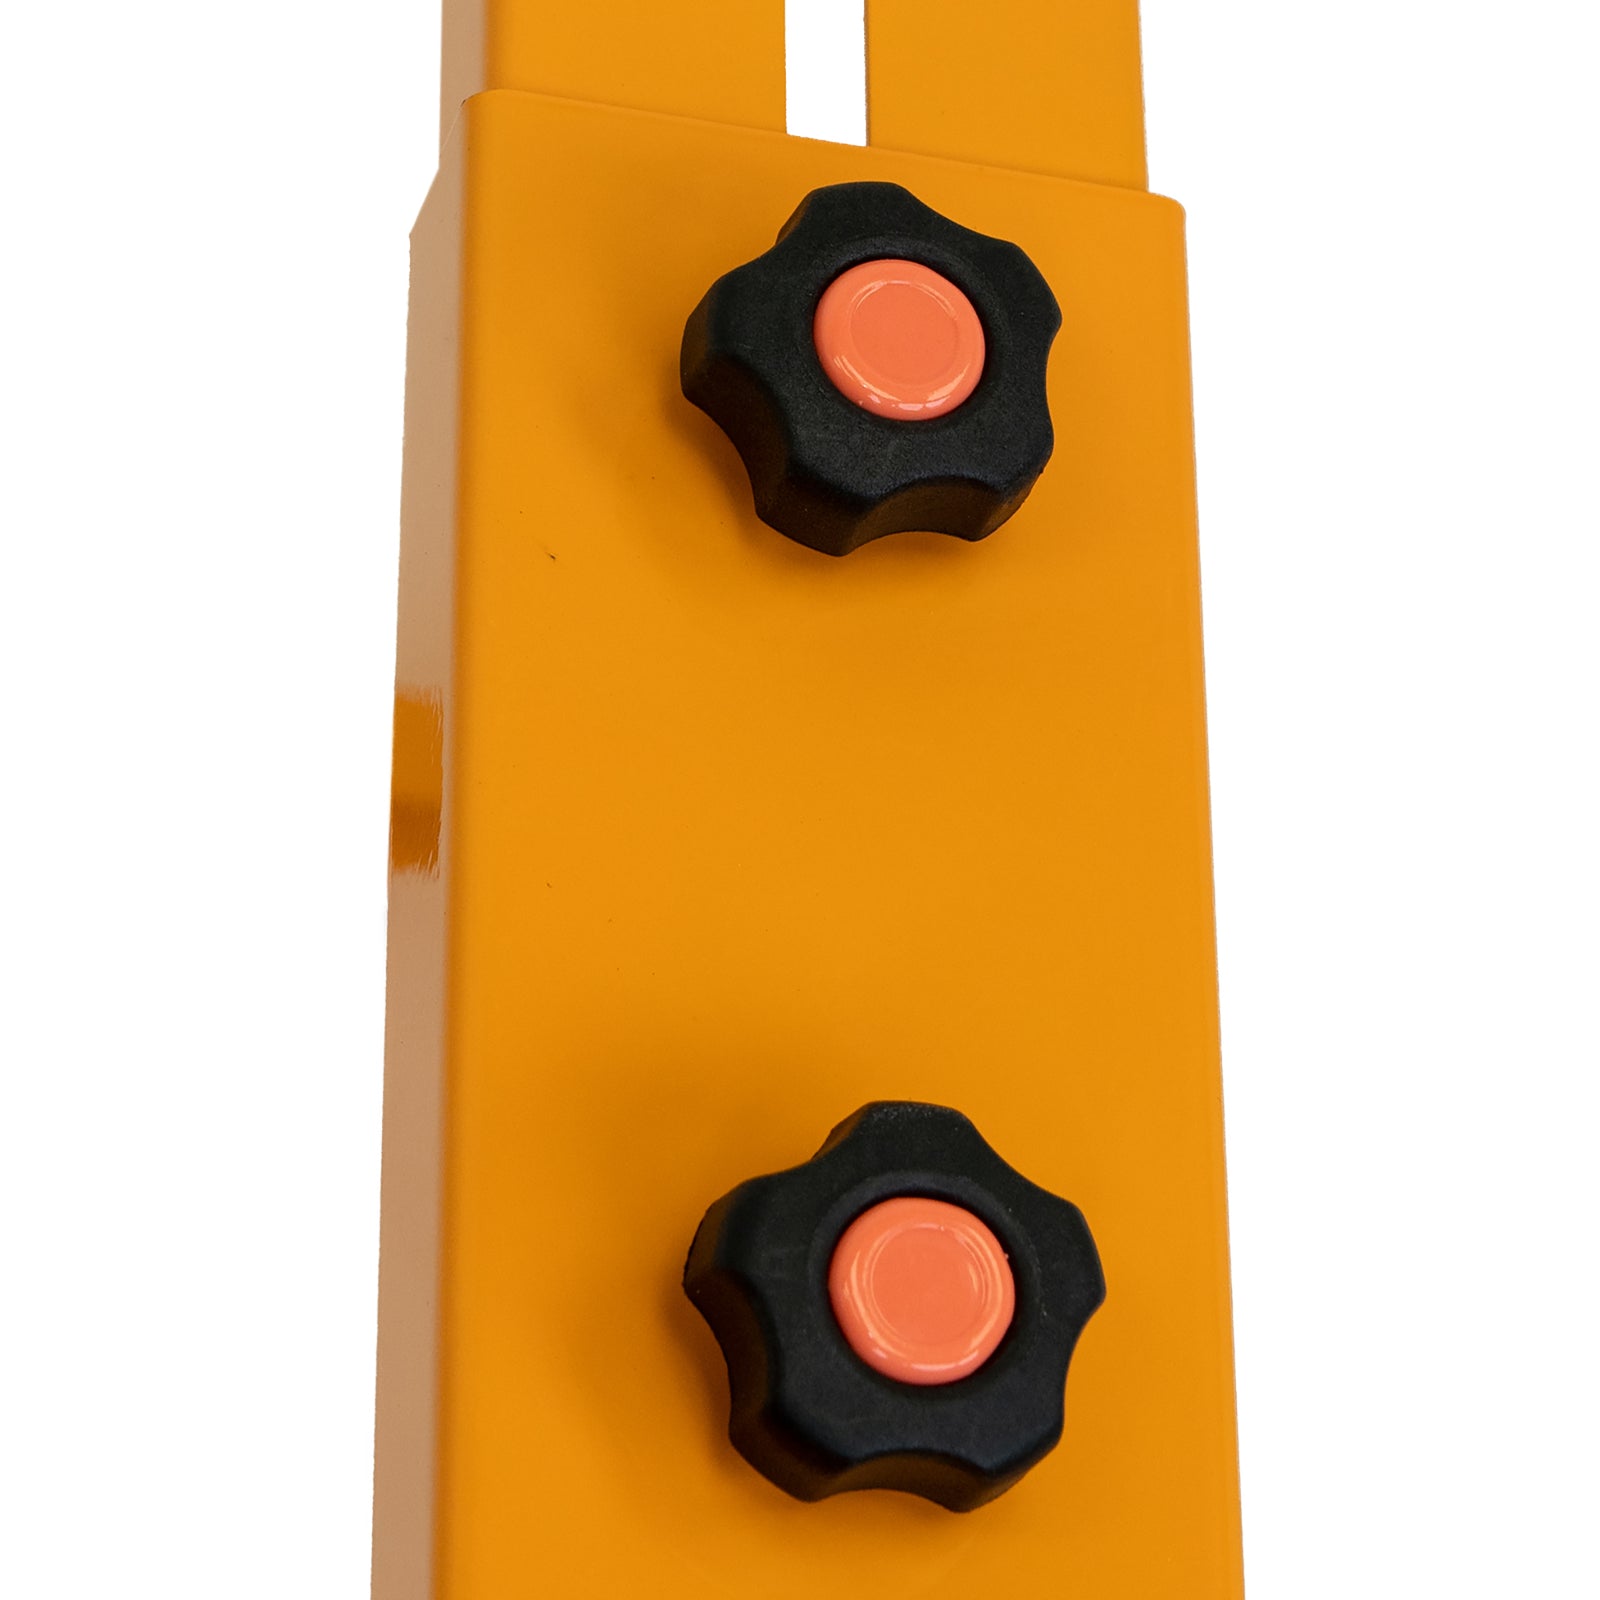 Close up to show the height adjustable knobs of the powder coated Base 